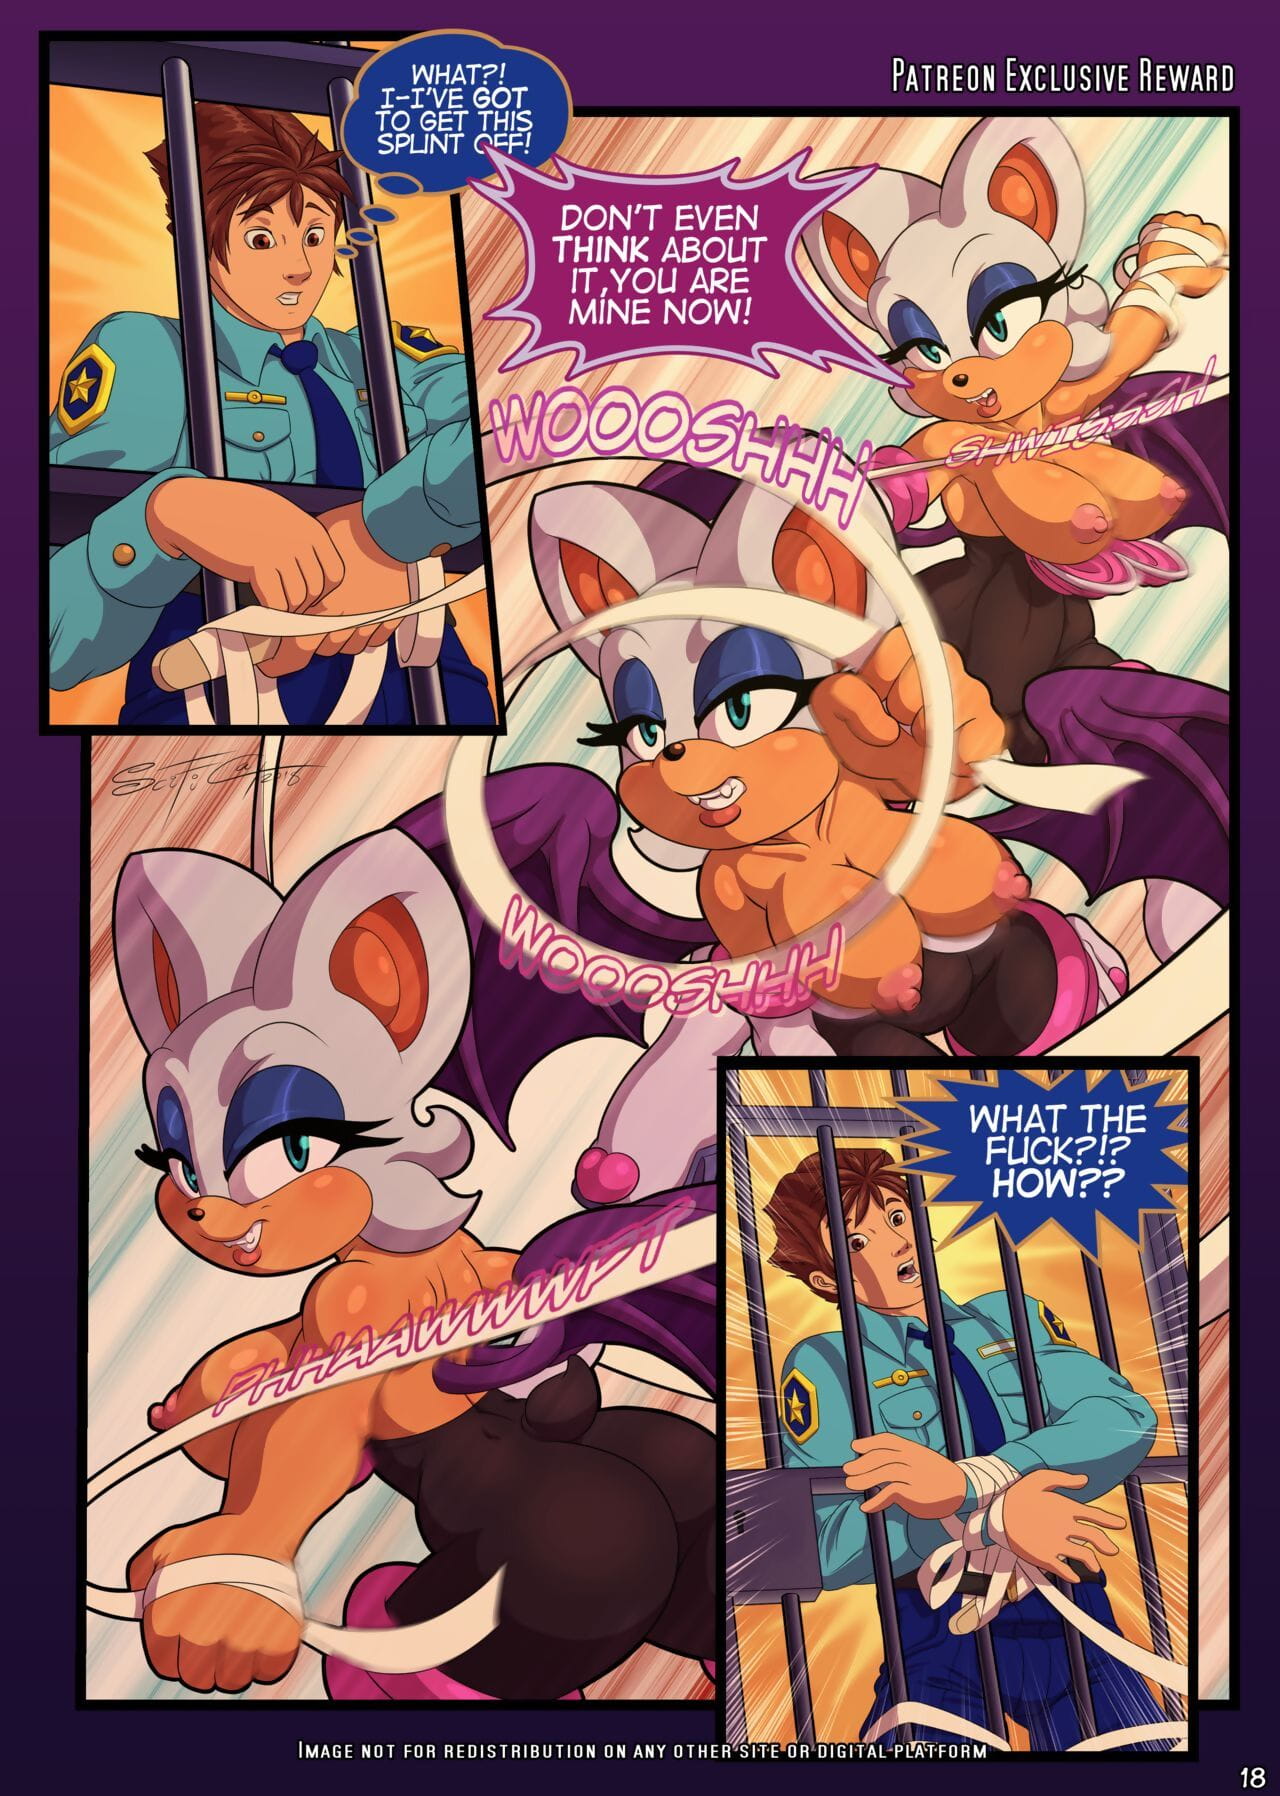 Night of The White Bat page 1